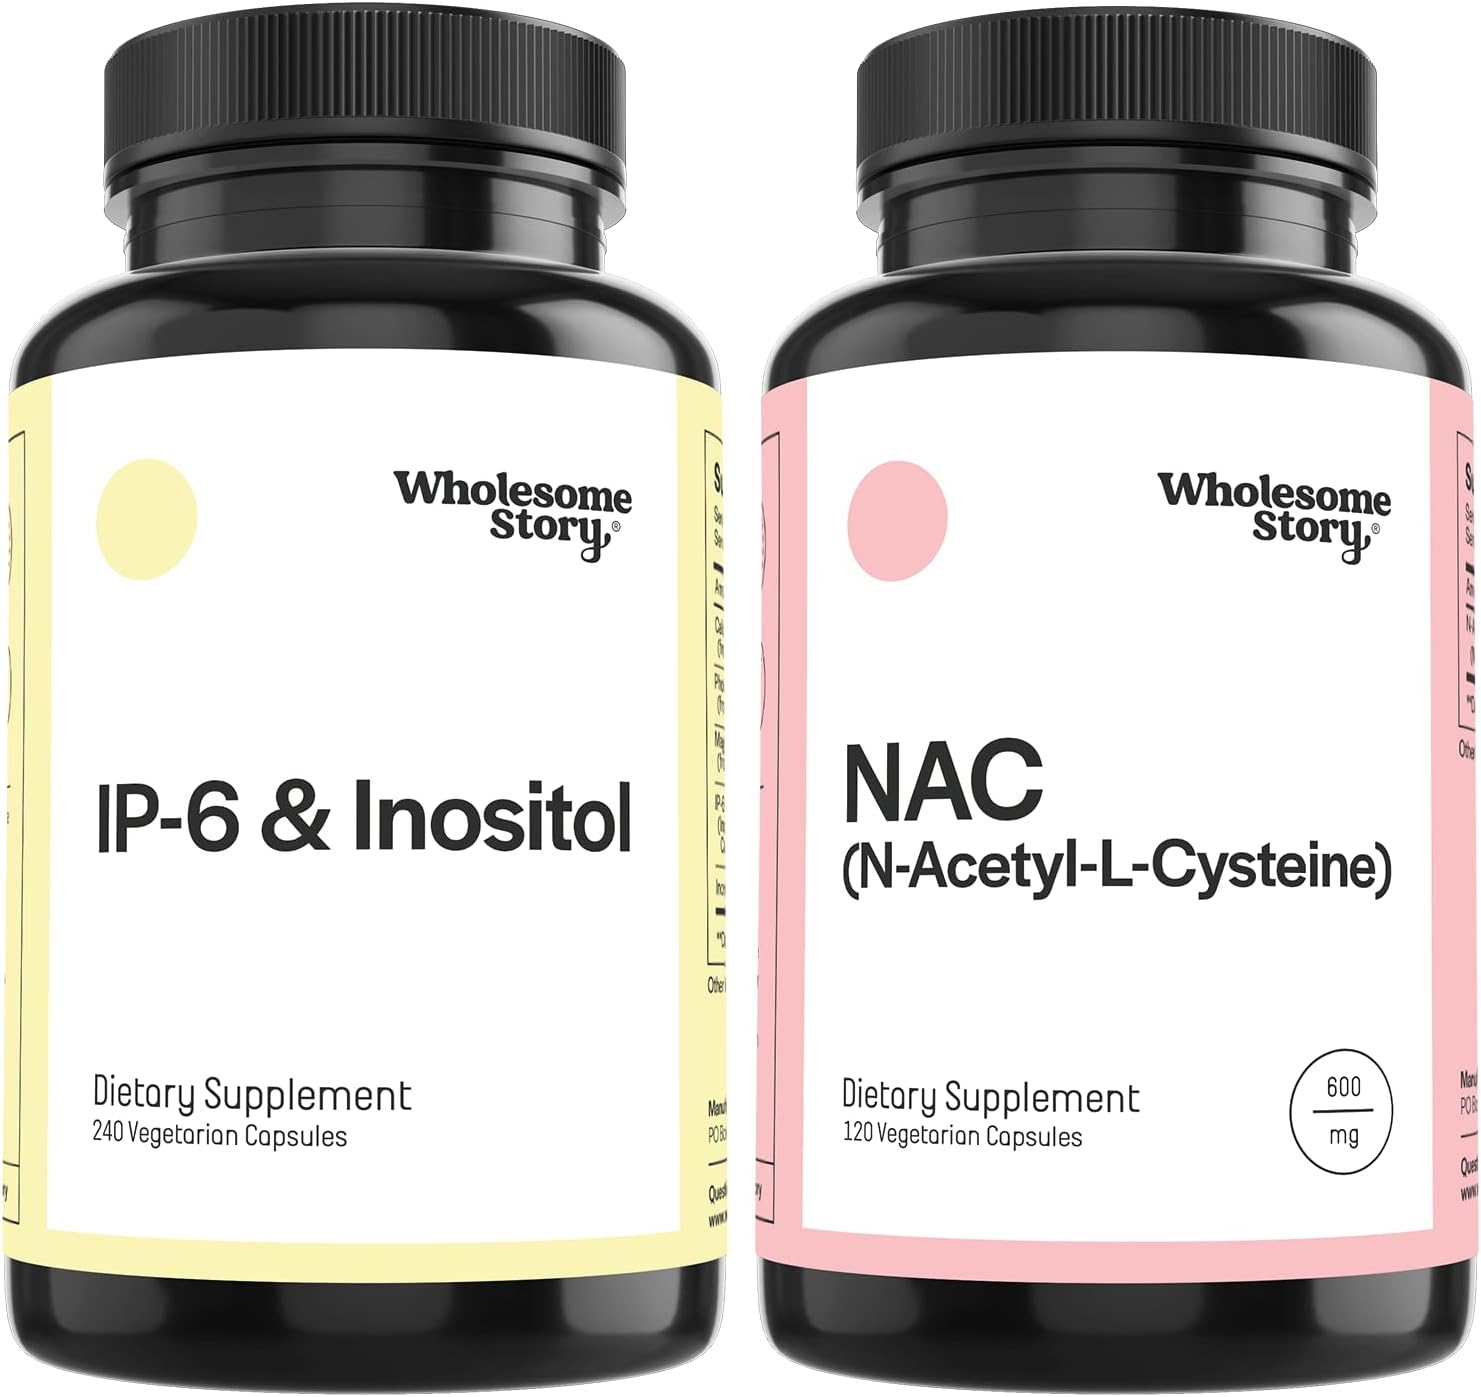 Wholesome Story IP6 Inositol Capsules for Immune Health Support + NAC Supplement N-Acetyl Cysteine 600 mg | Antioxidant, Vegan  Gluten-Free | 60 Day  120 Day Supply